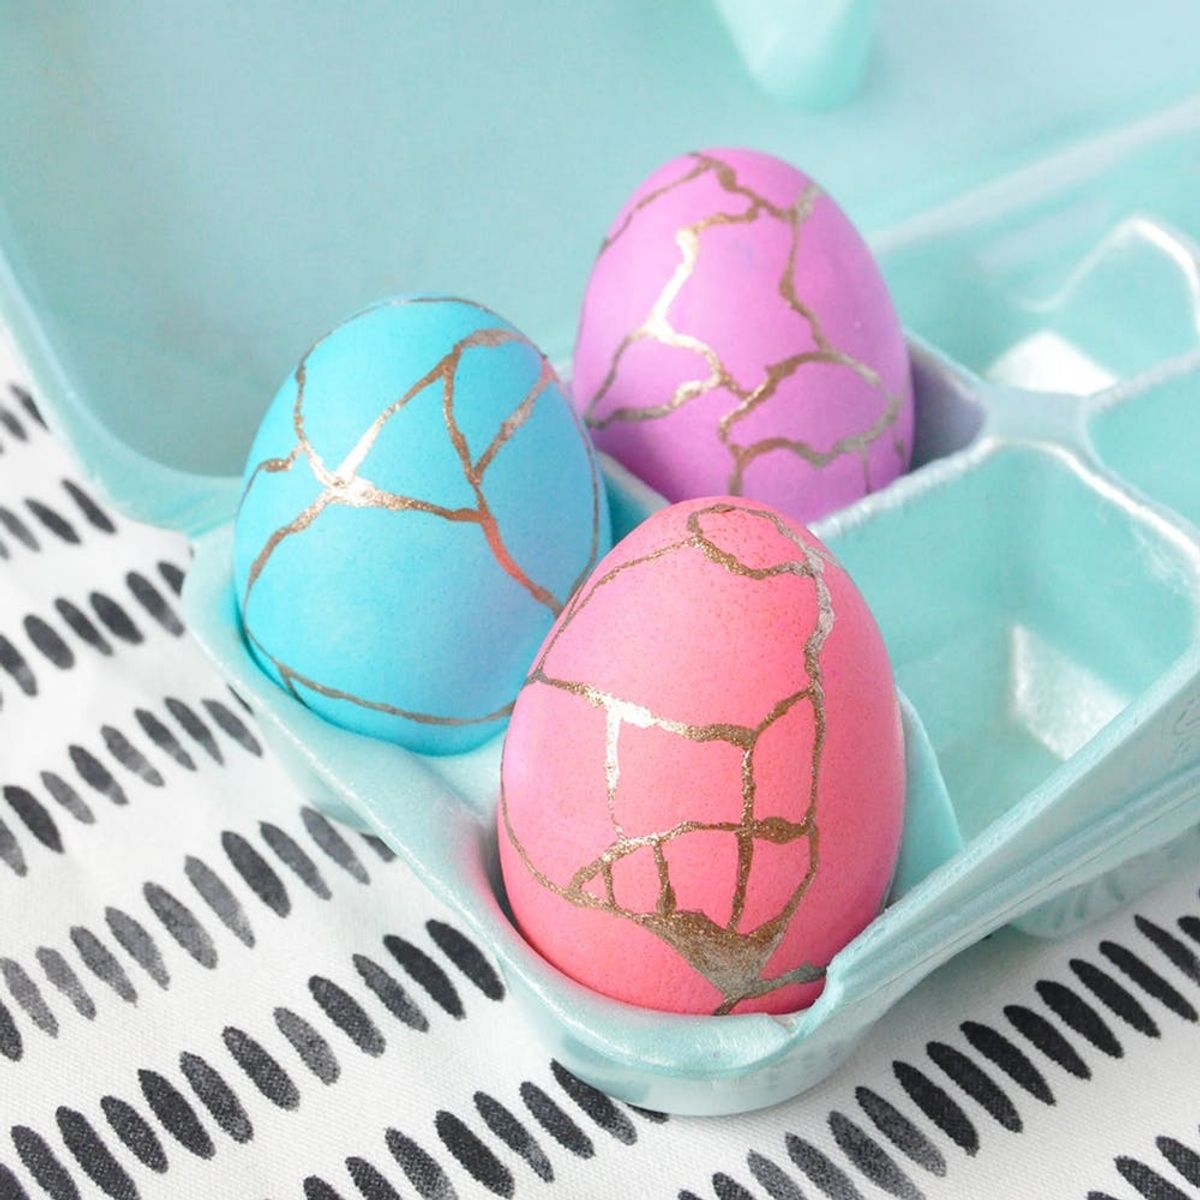 Add a Pop of Gold to Easter With These DIY Kintsugi-Inspired Eggs